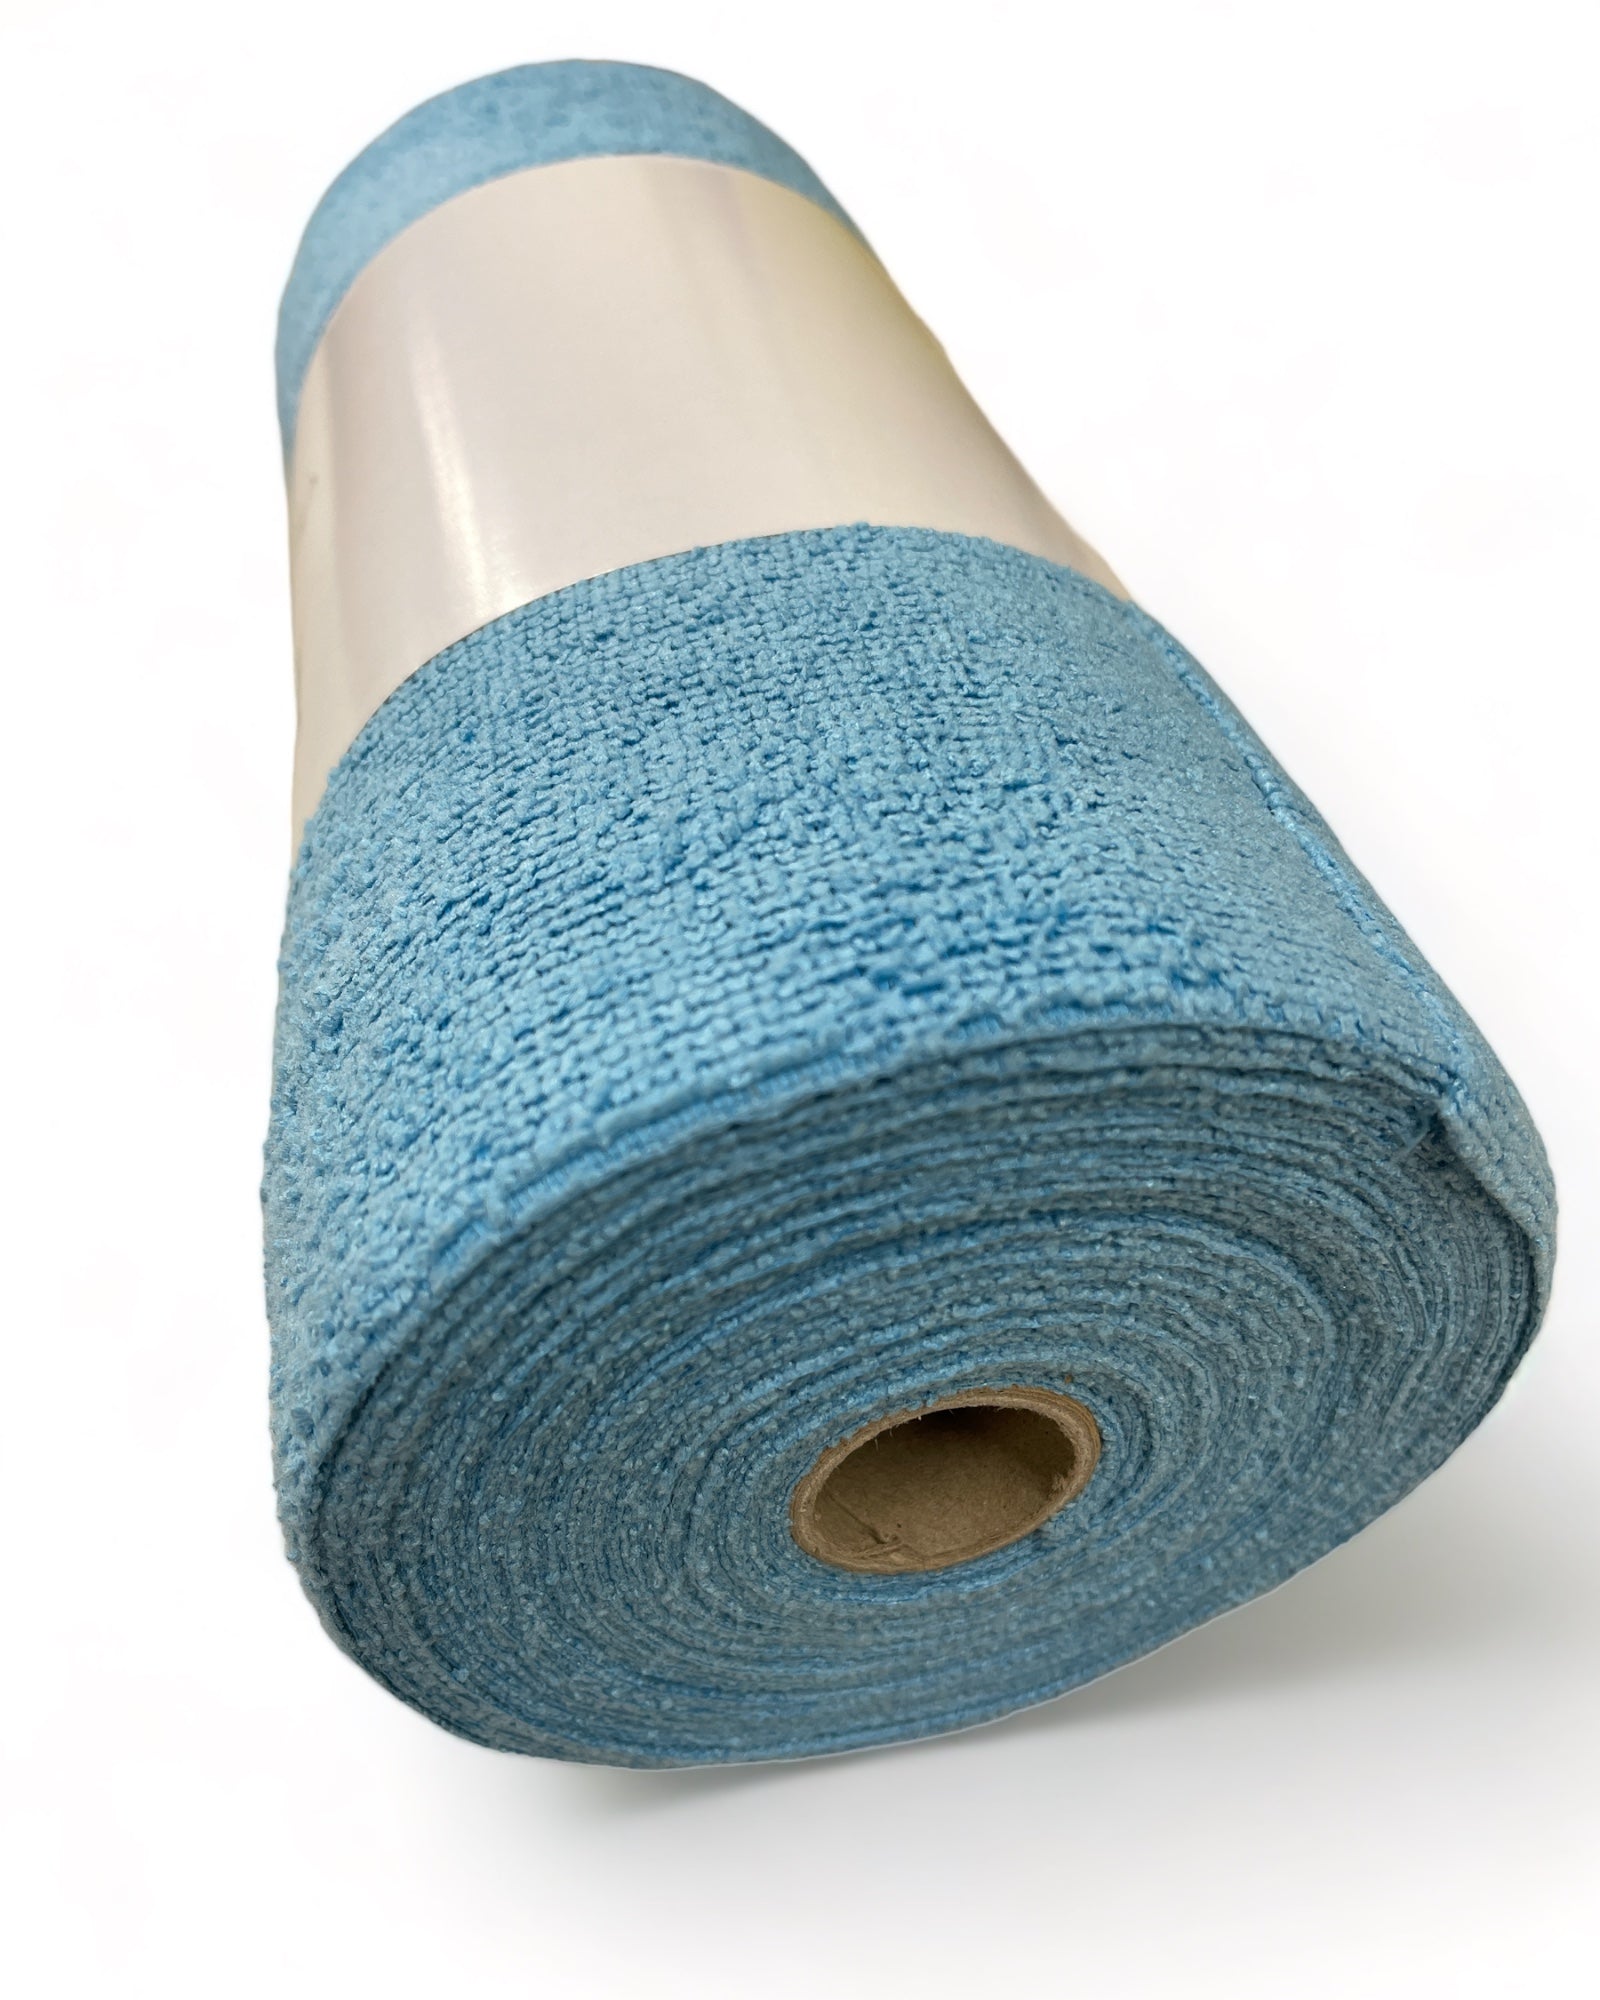 Blue microfiber cloth roll presented on a clean white surface